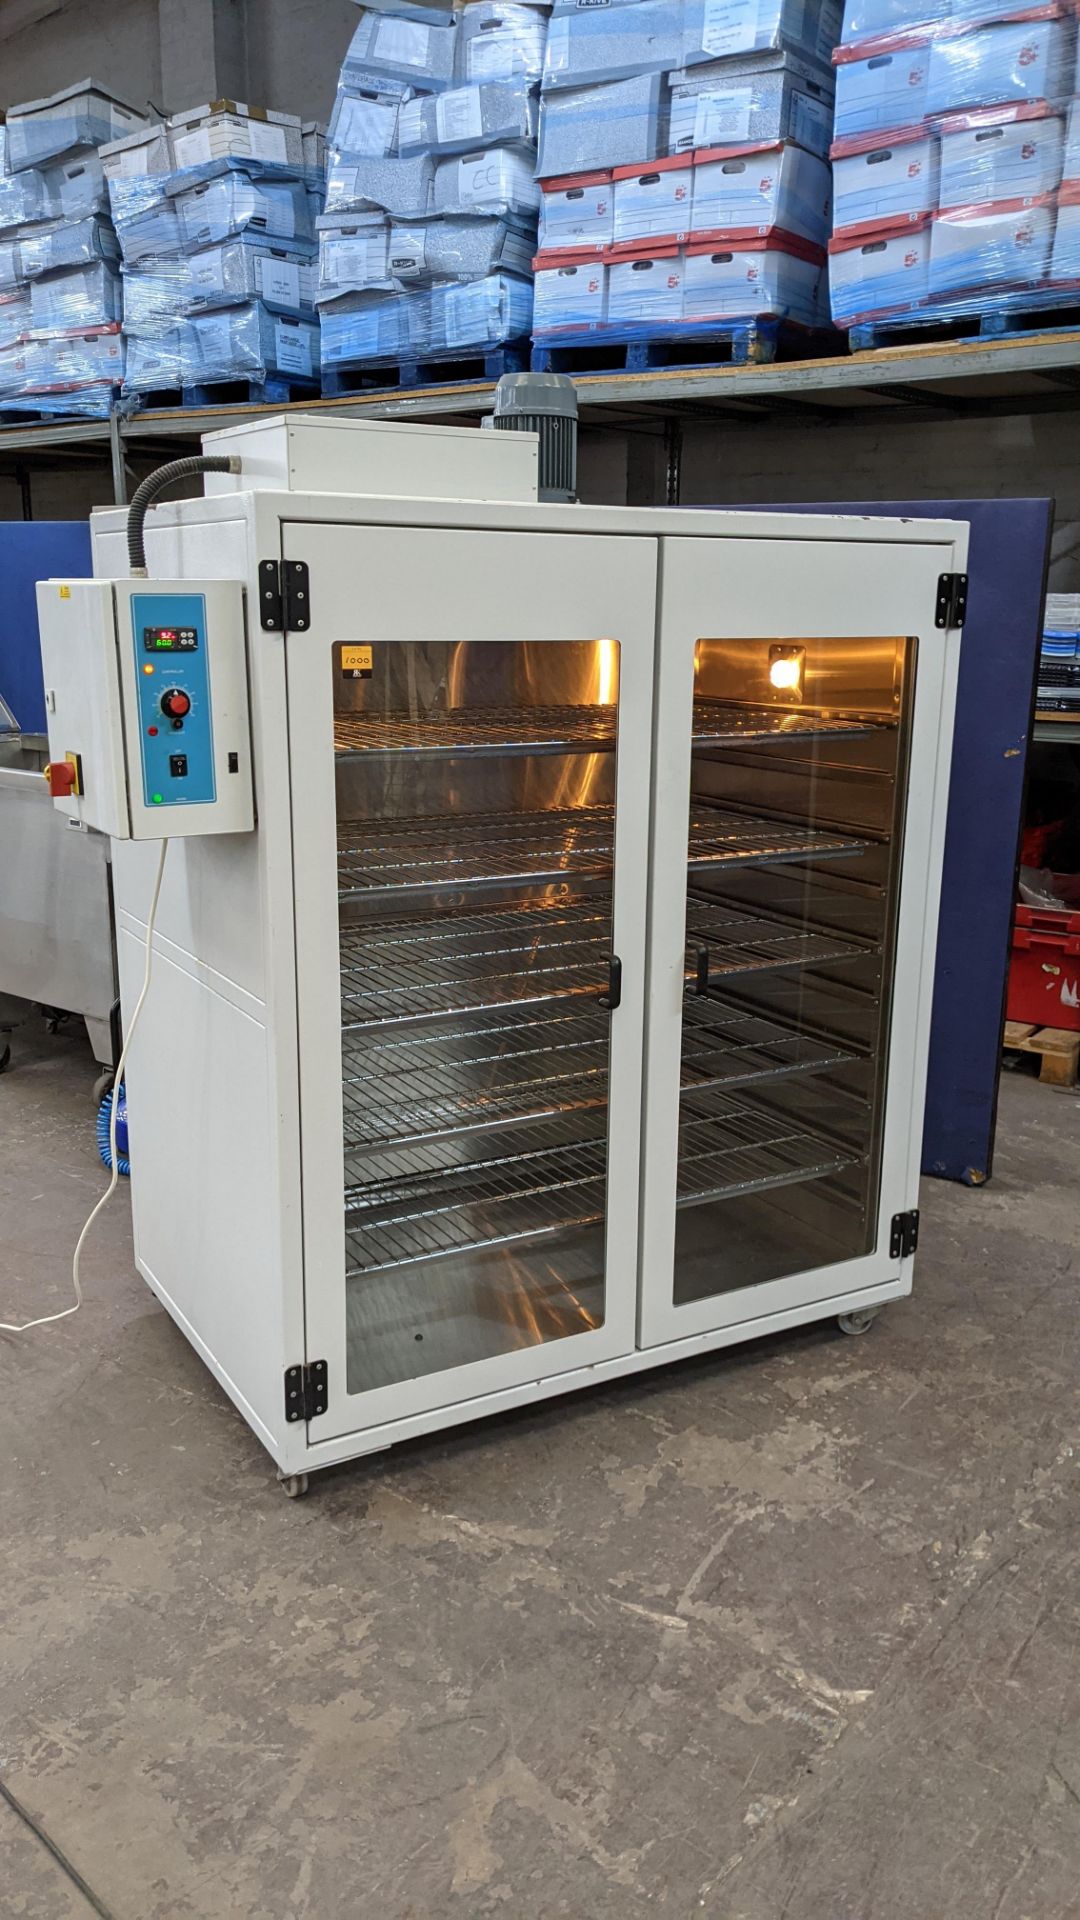 Genlab SPEC/LCO (Specialist Large Capacity Oven) drying cabinet / oven.